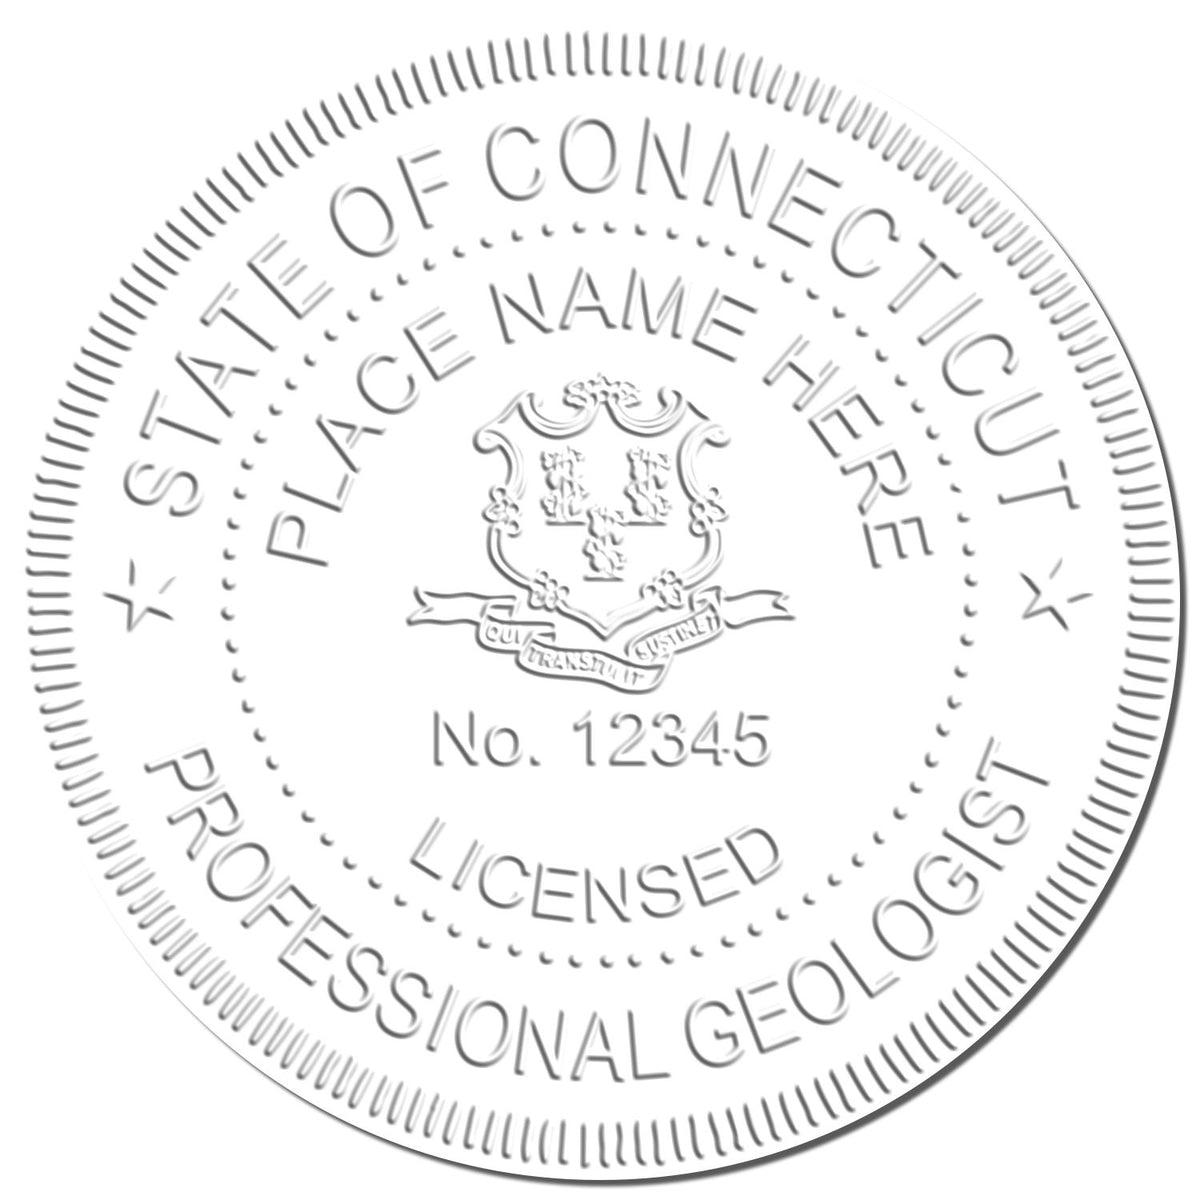 An in use photo of the Heavy Duty Cast Iron Connecticut Geologist Seal Embosser showing a sample imprint on a cardstock